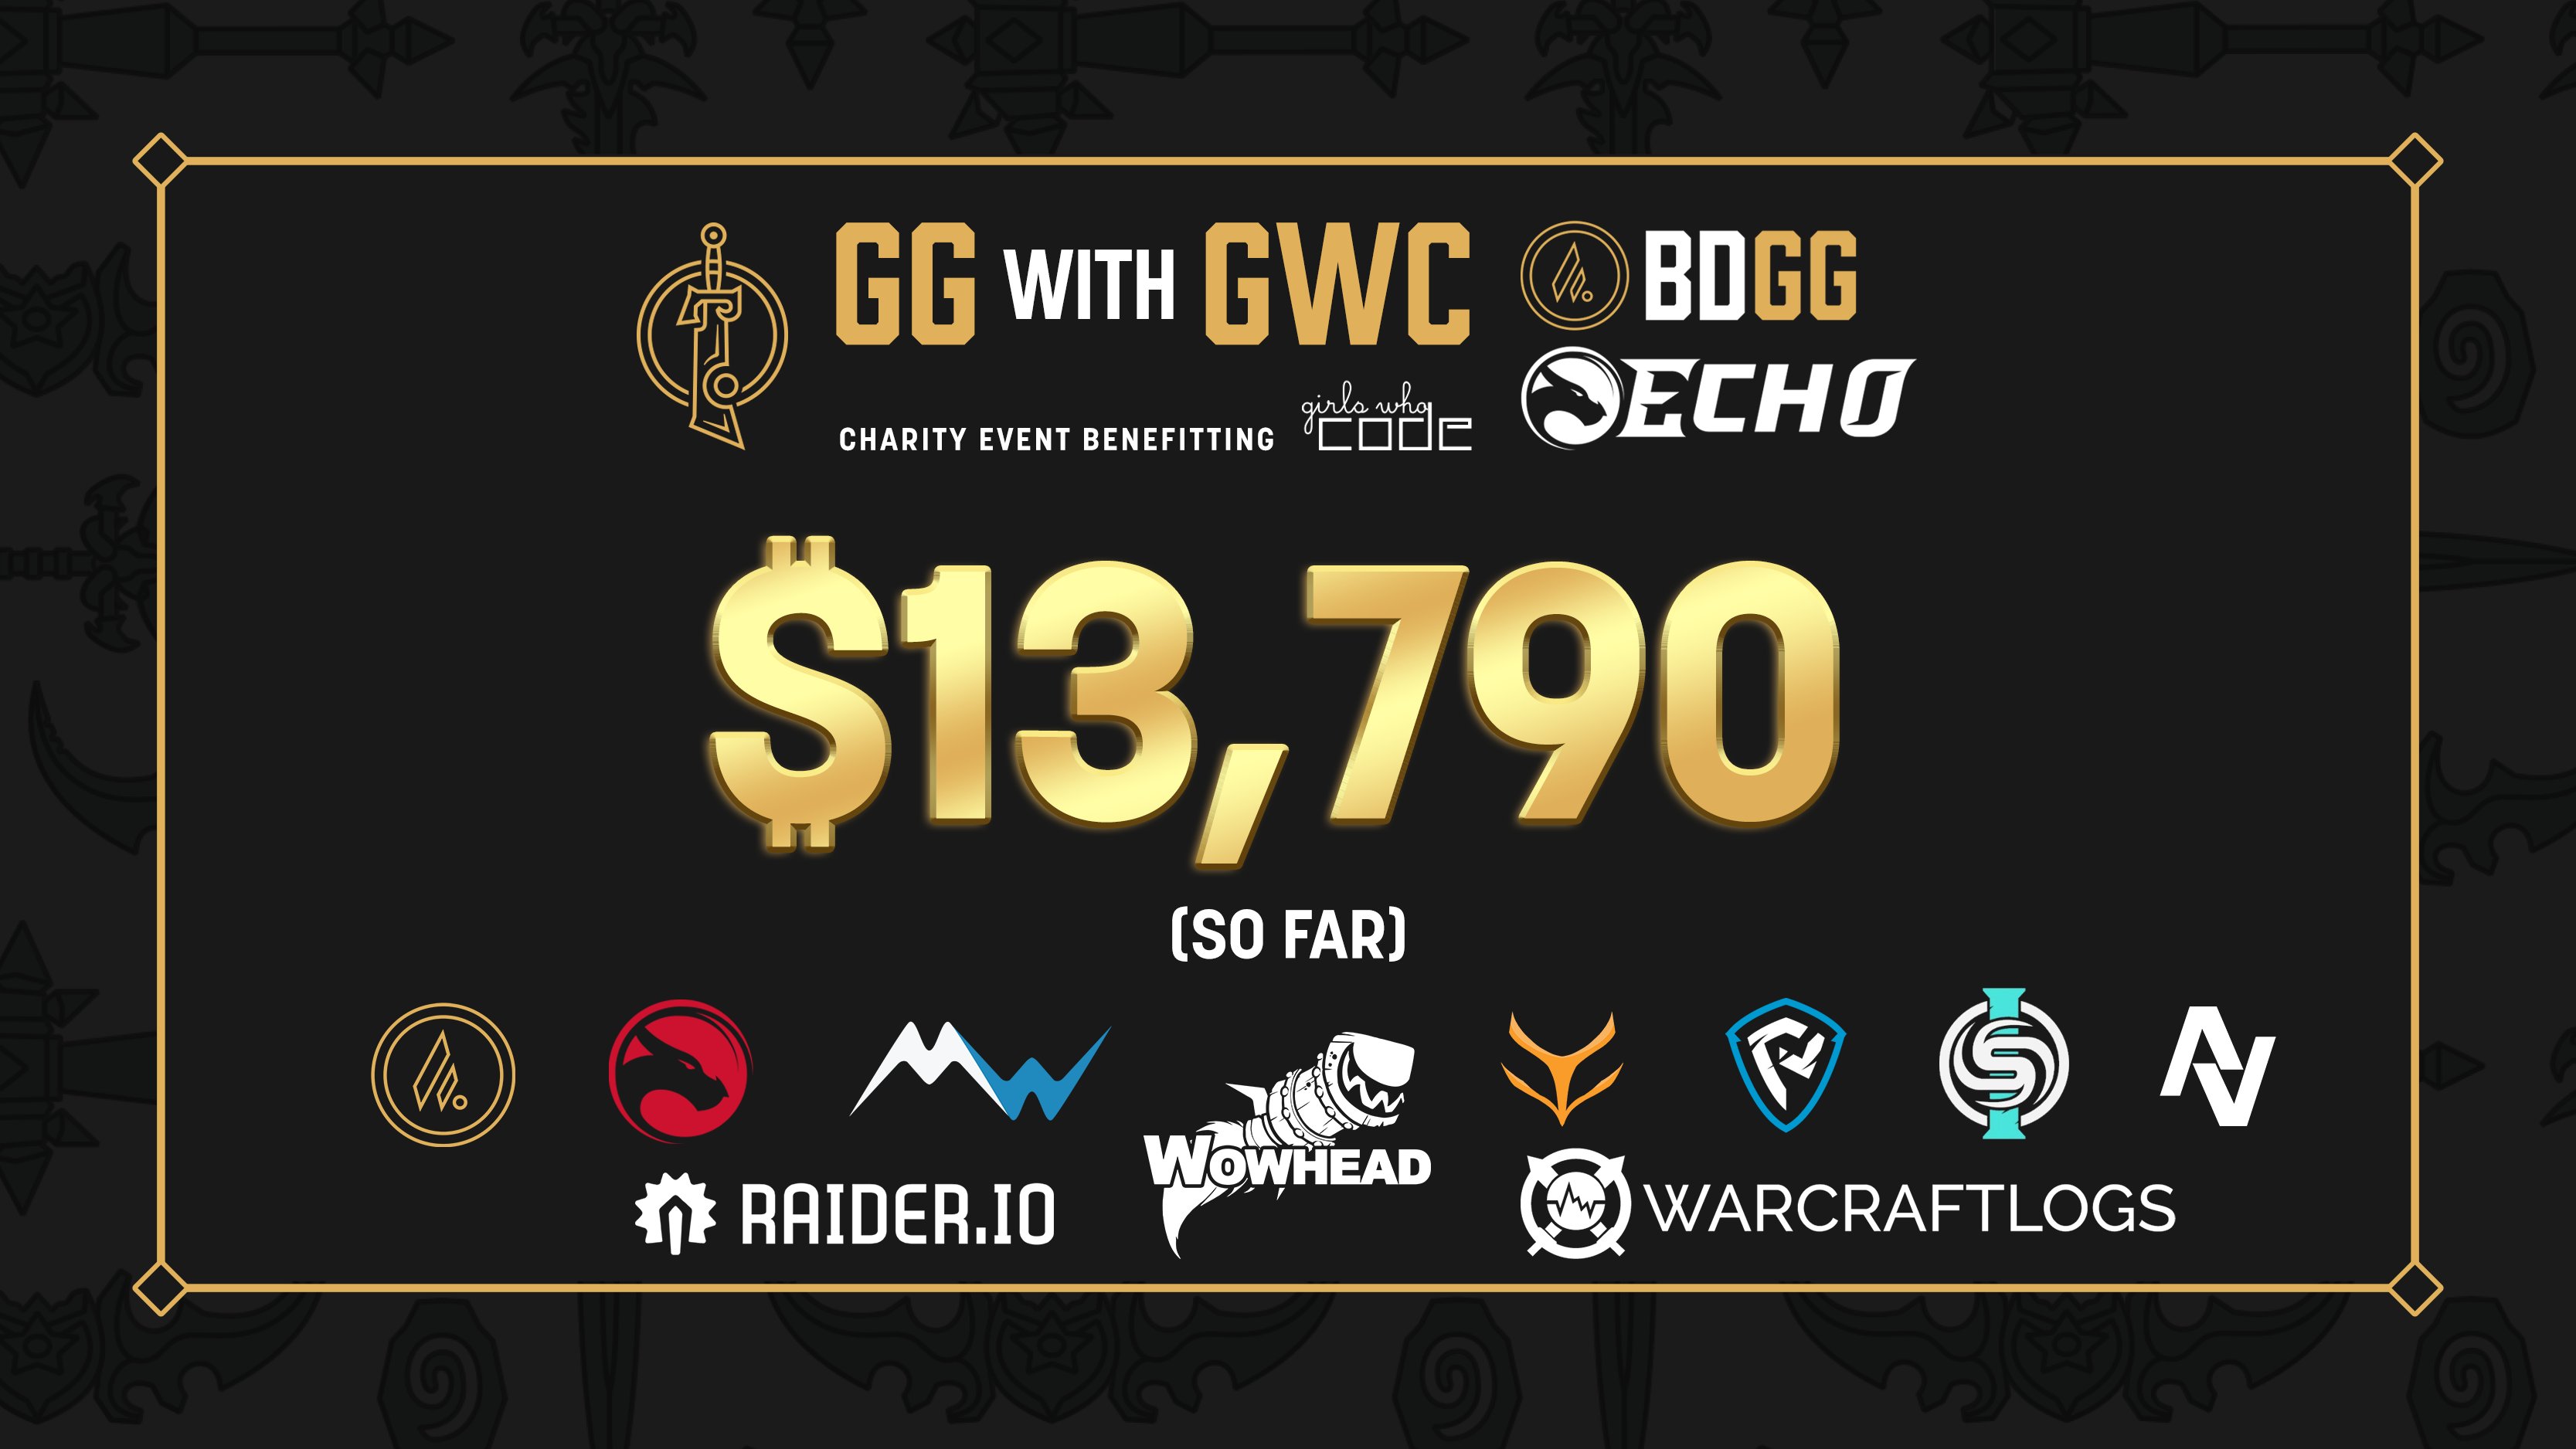 GG with GWC Raises over $13k!